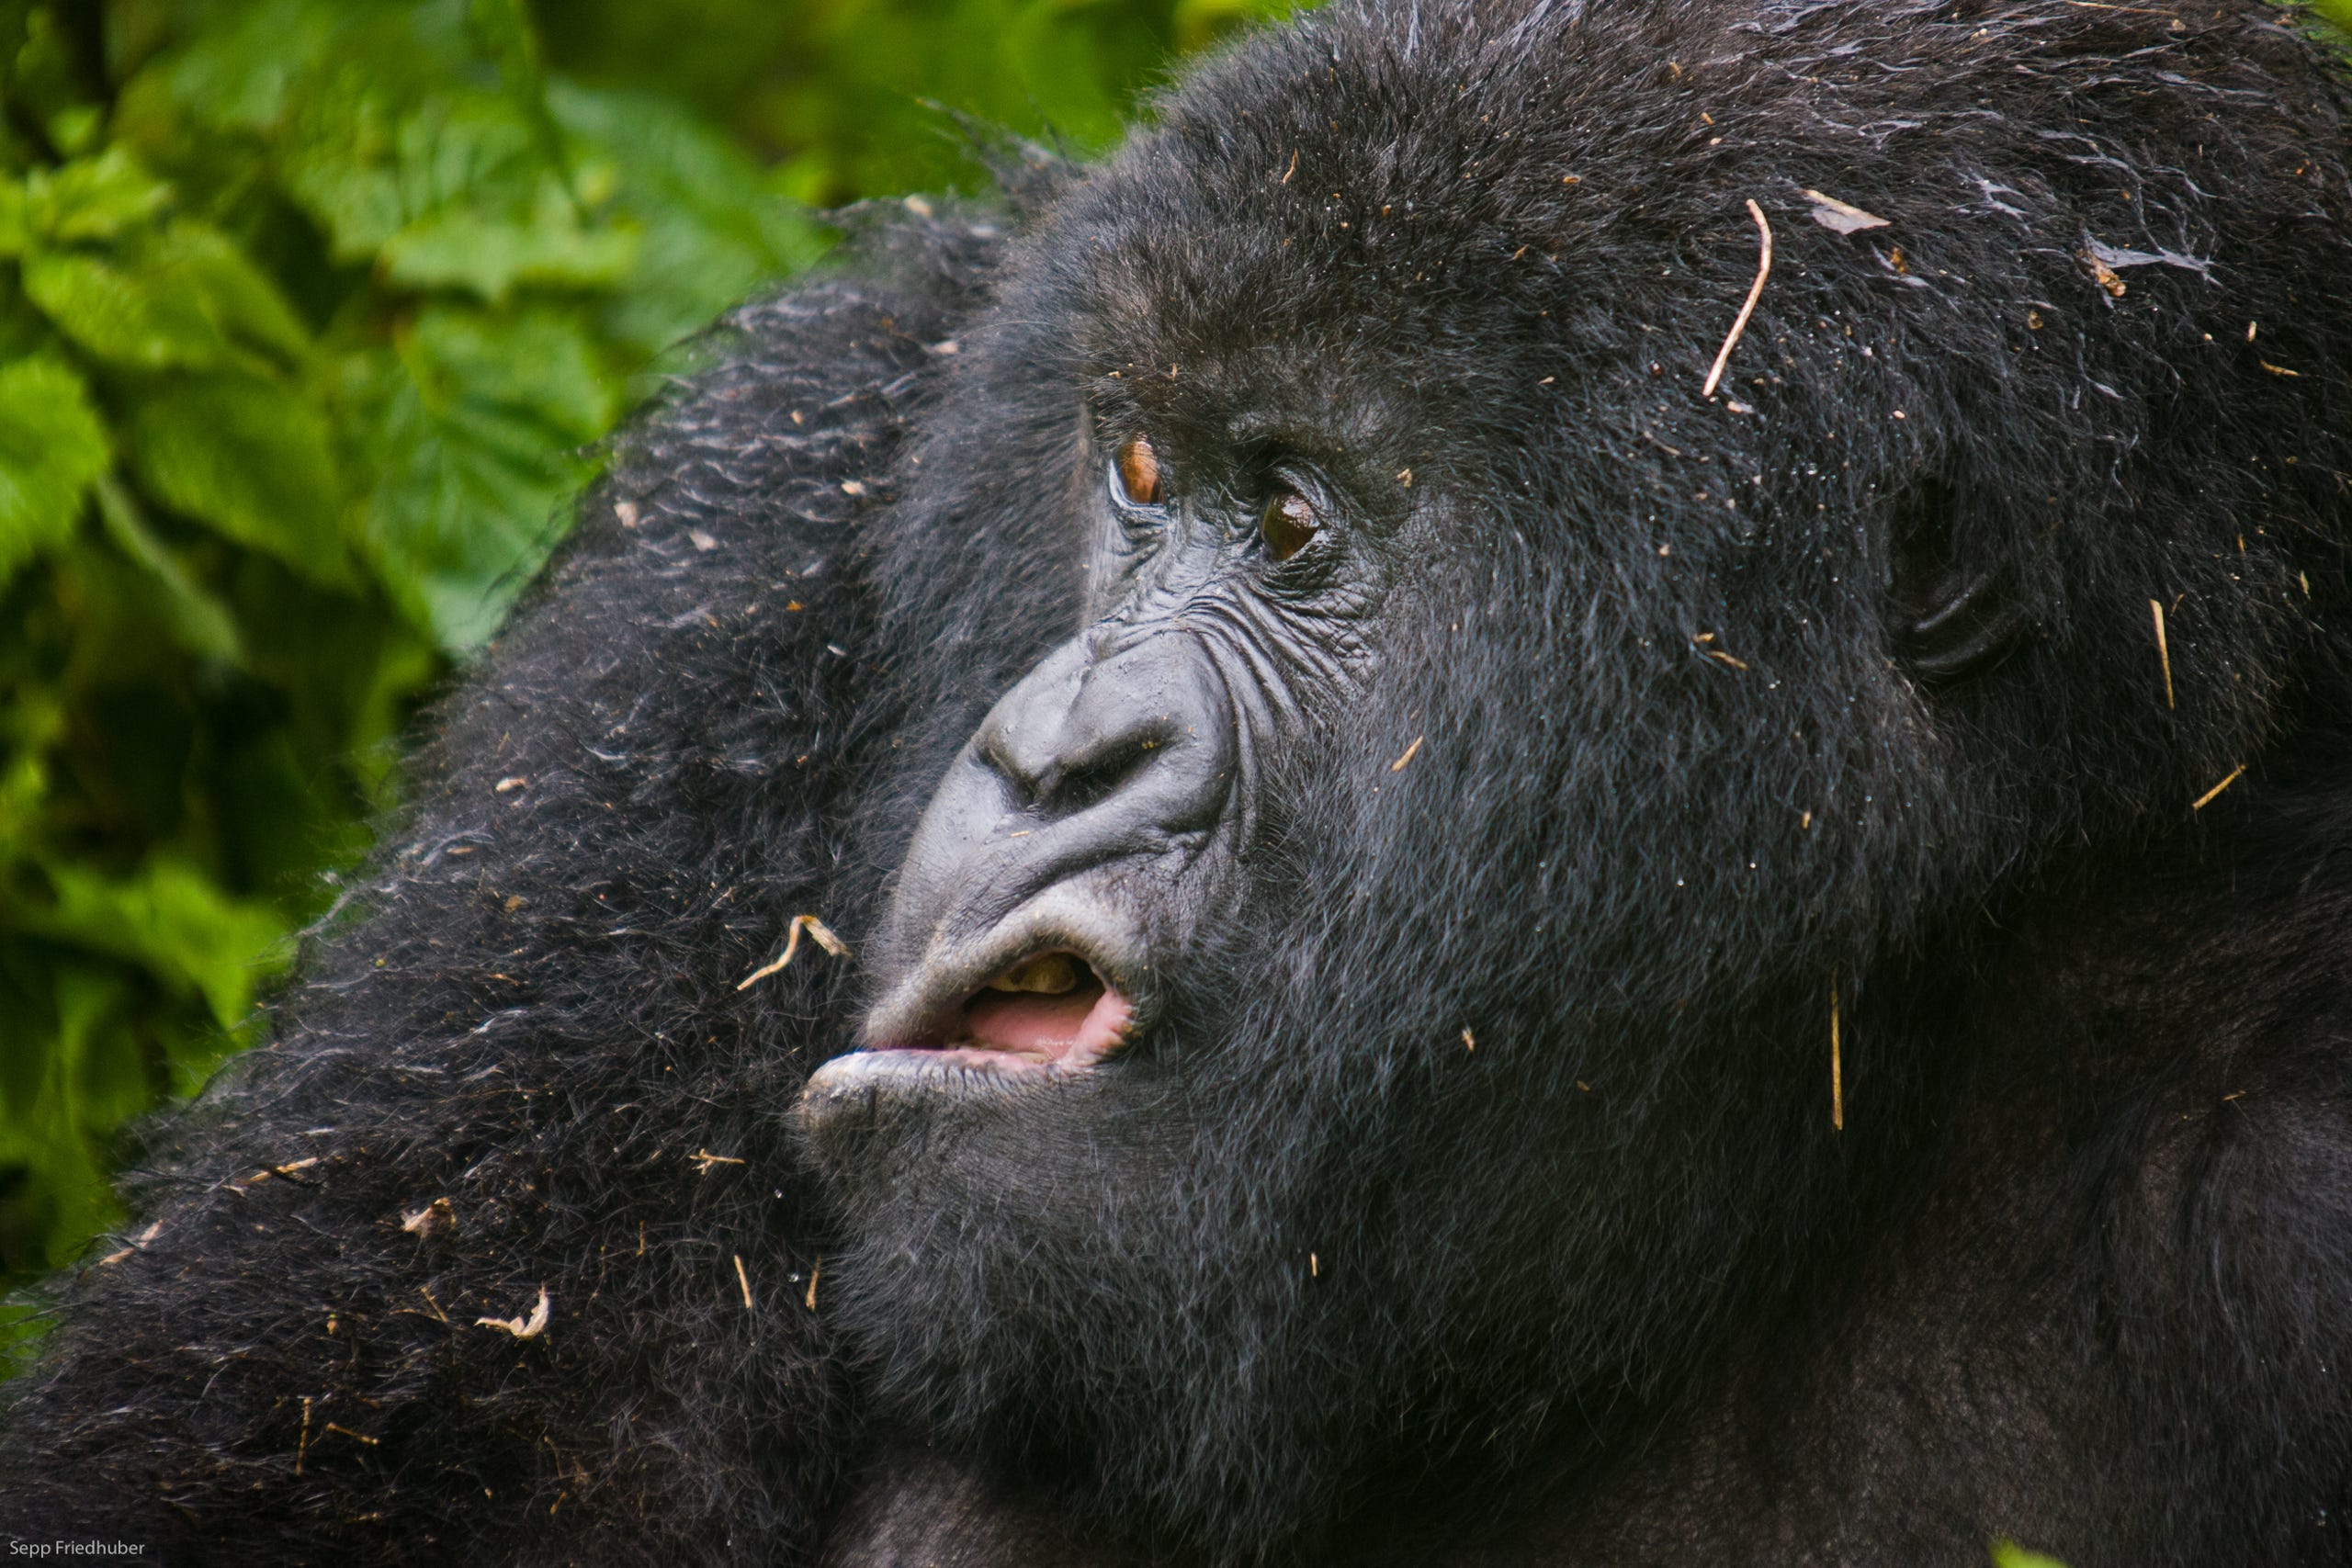 This mountains gorilla is making grimaces after he came out of the bush after the rain in the Virunga National park, Rwanda.